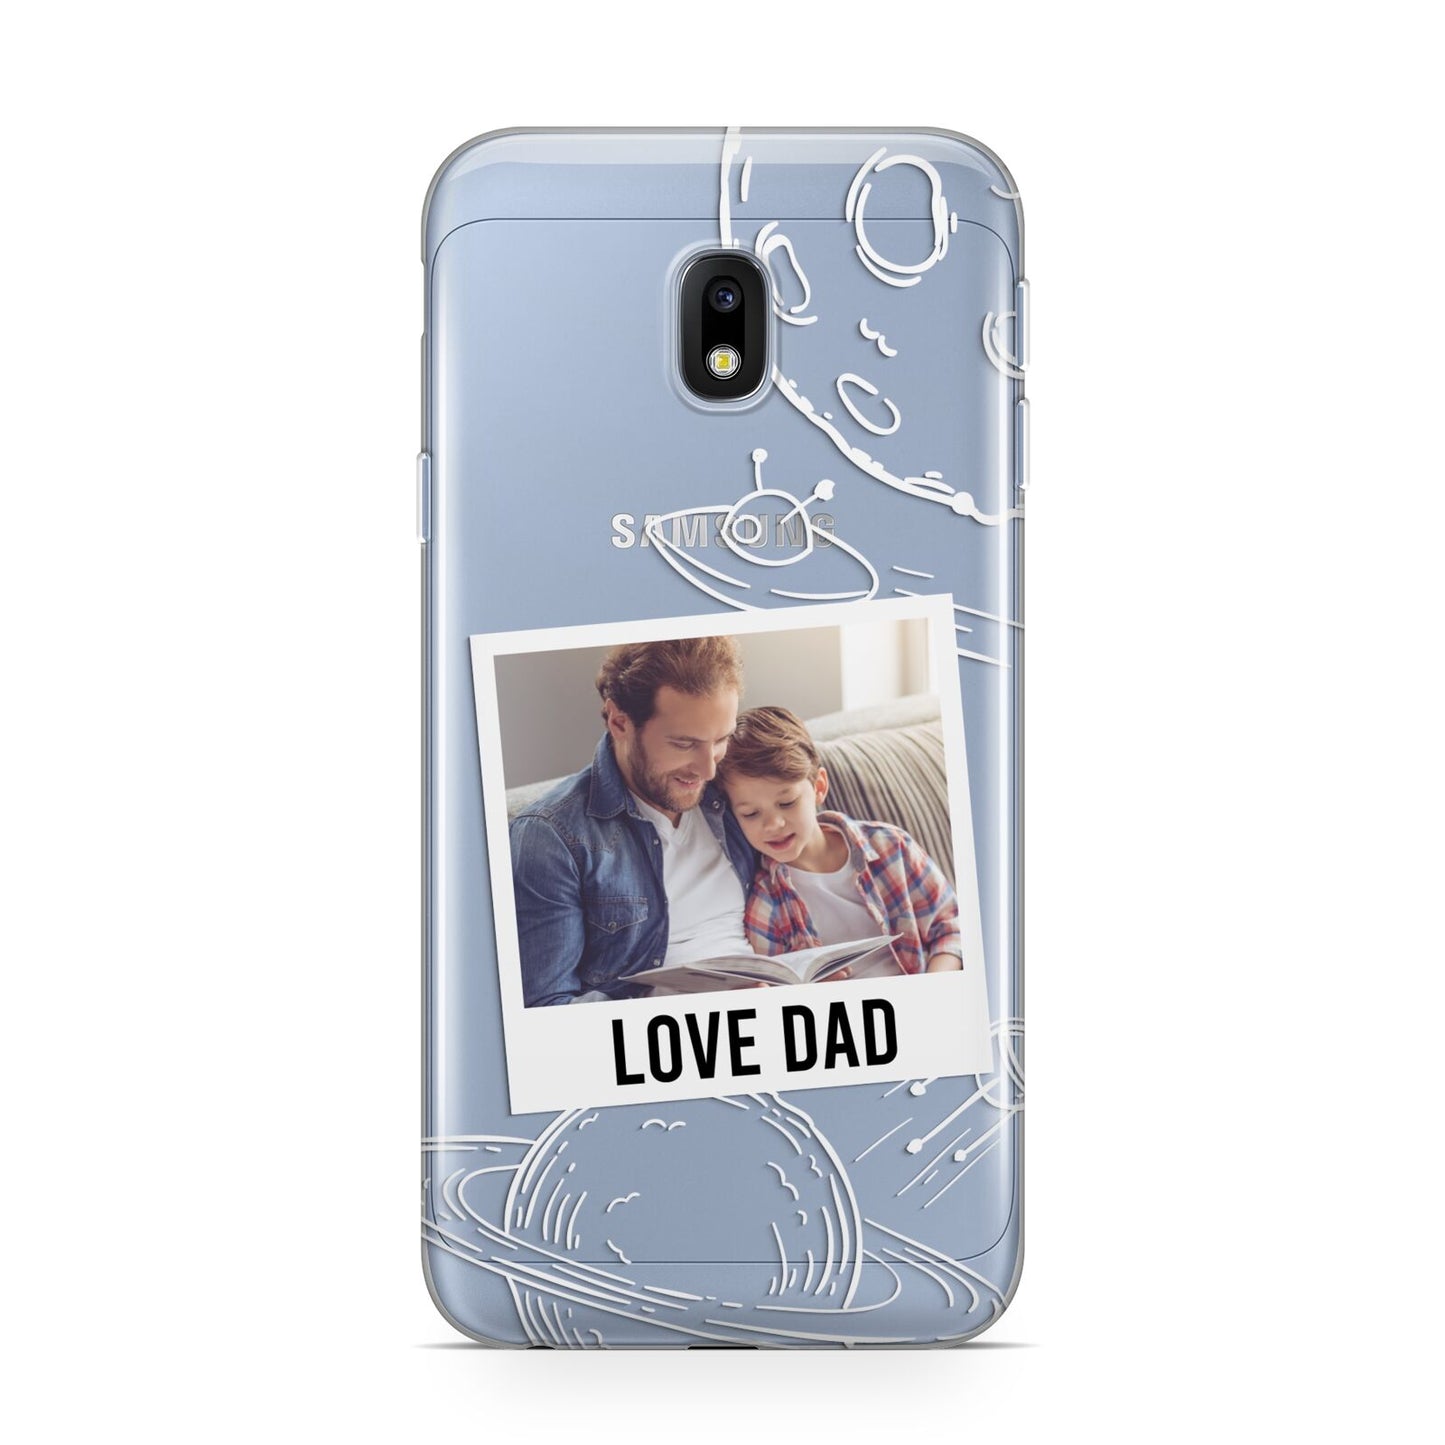 Personalised From Dad Photo Samsung Galaxy J3 2017 Case